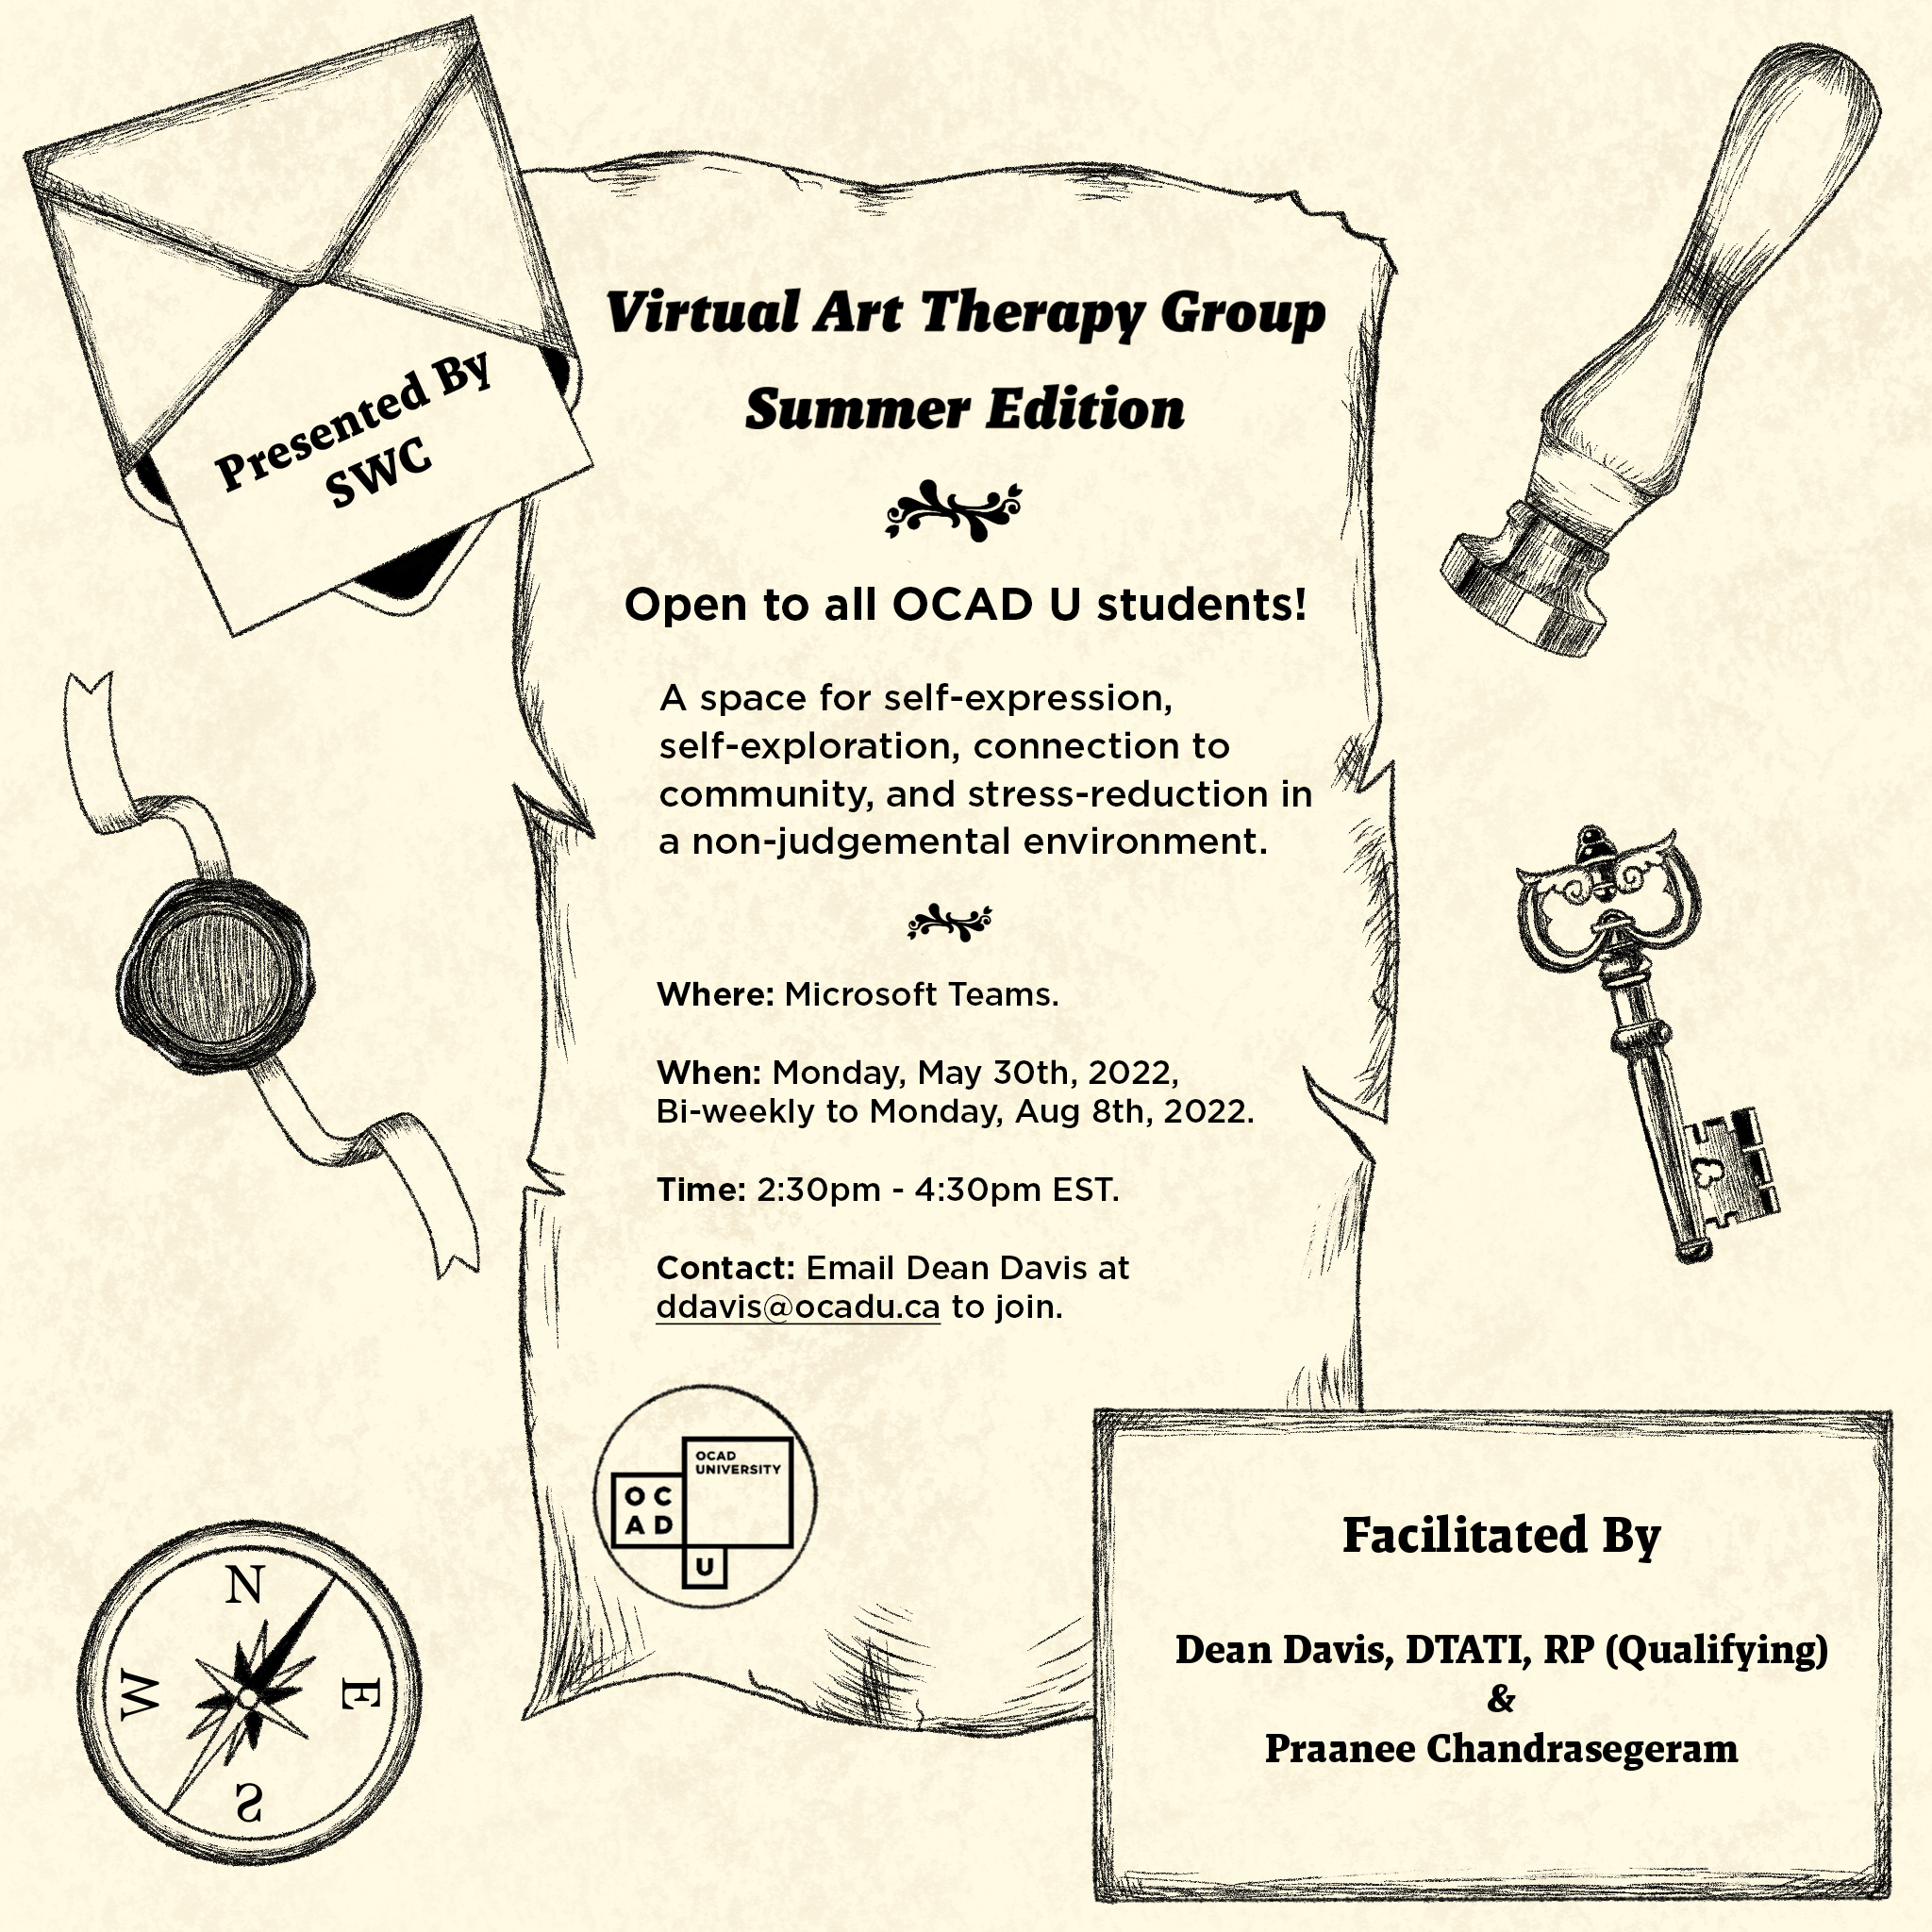 Graphic with details regarding Virtual Art Therapy groups for the spring/summer 2022 semester.